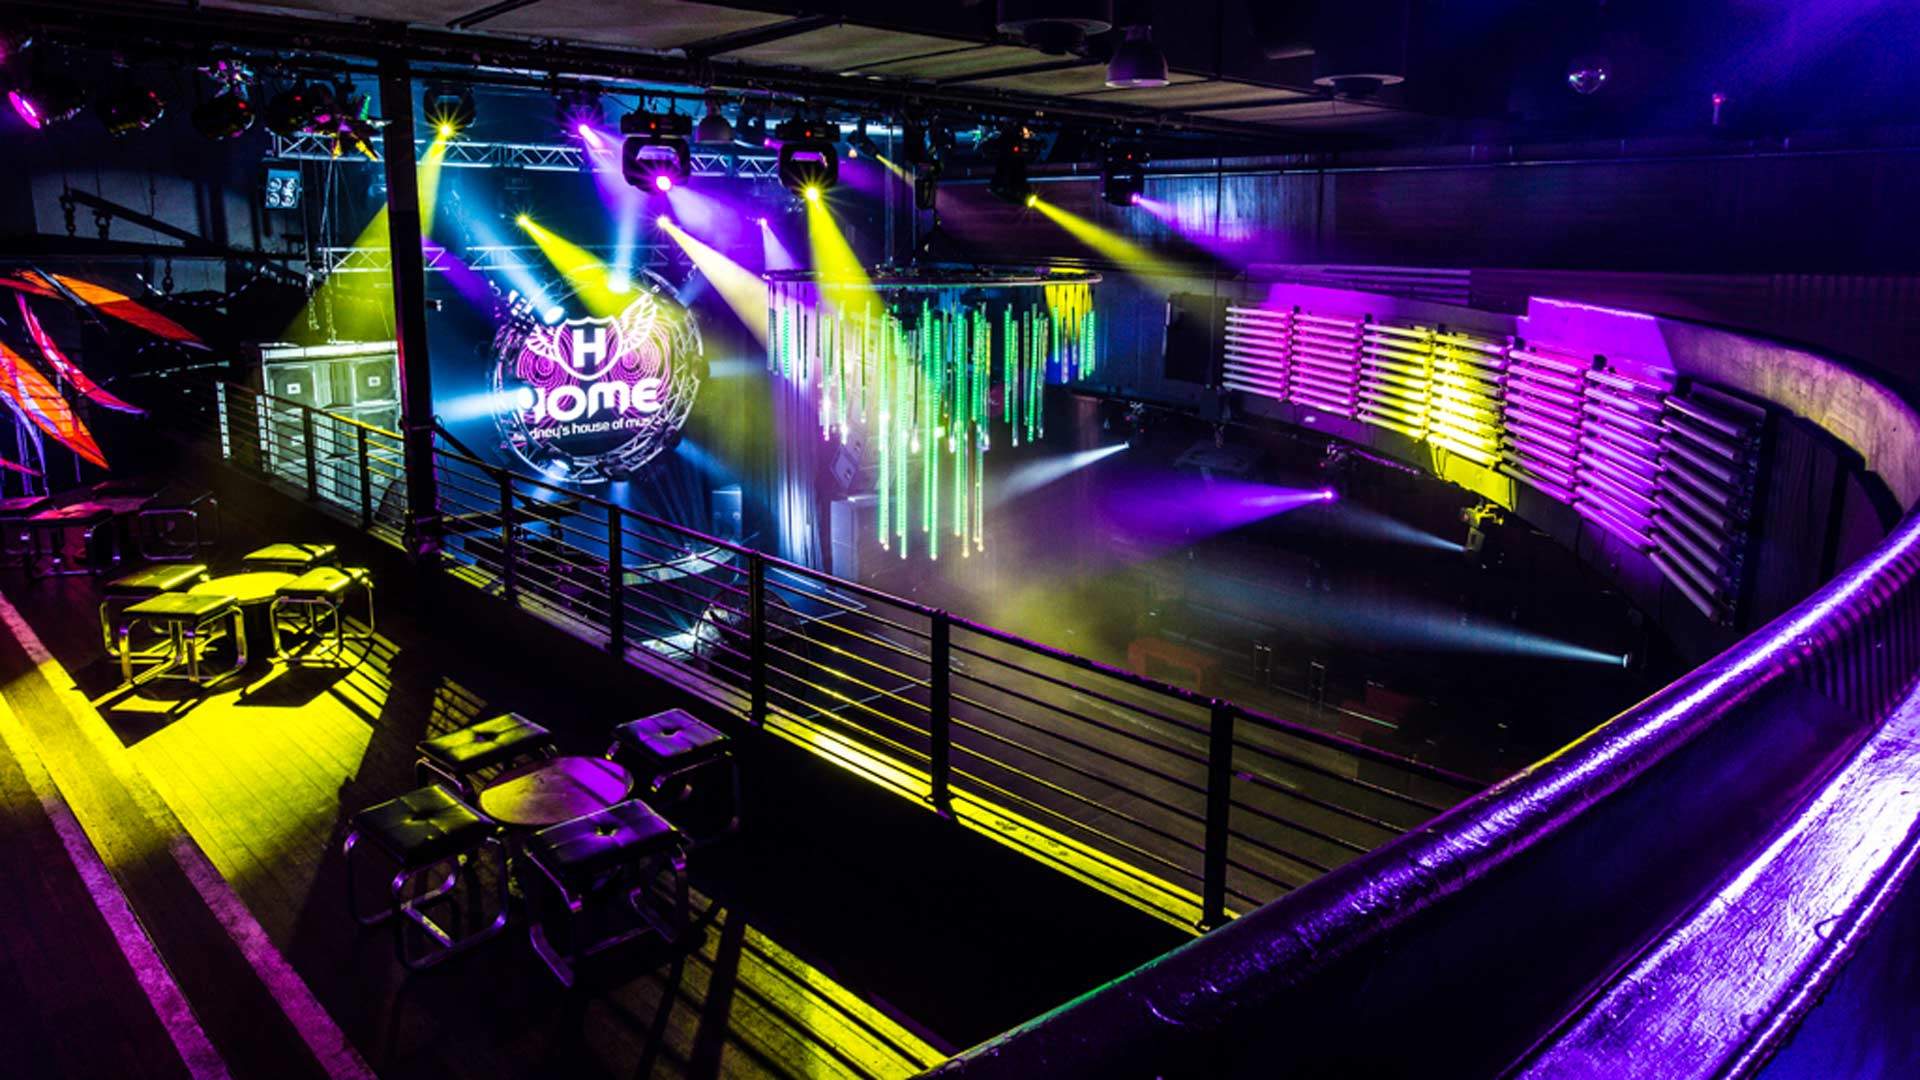 Home Nightclub Has Swapped the Dance Floor for Beds and Is Reopening in  Time for Mardi Gras - Concrete Playground